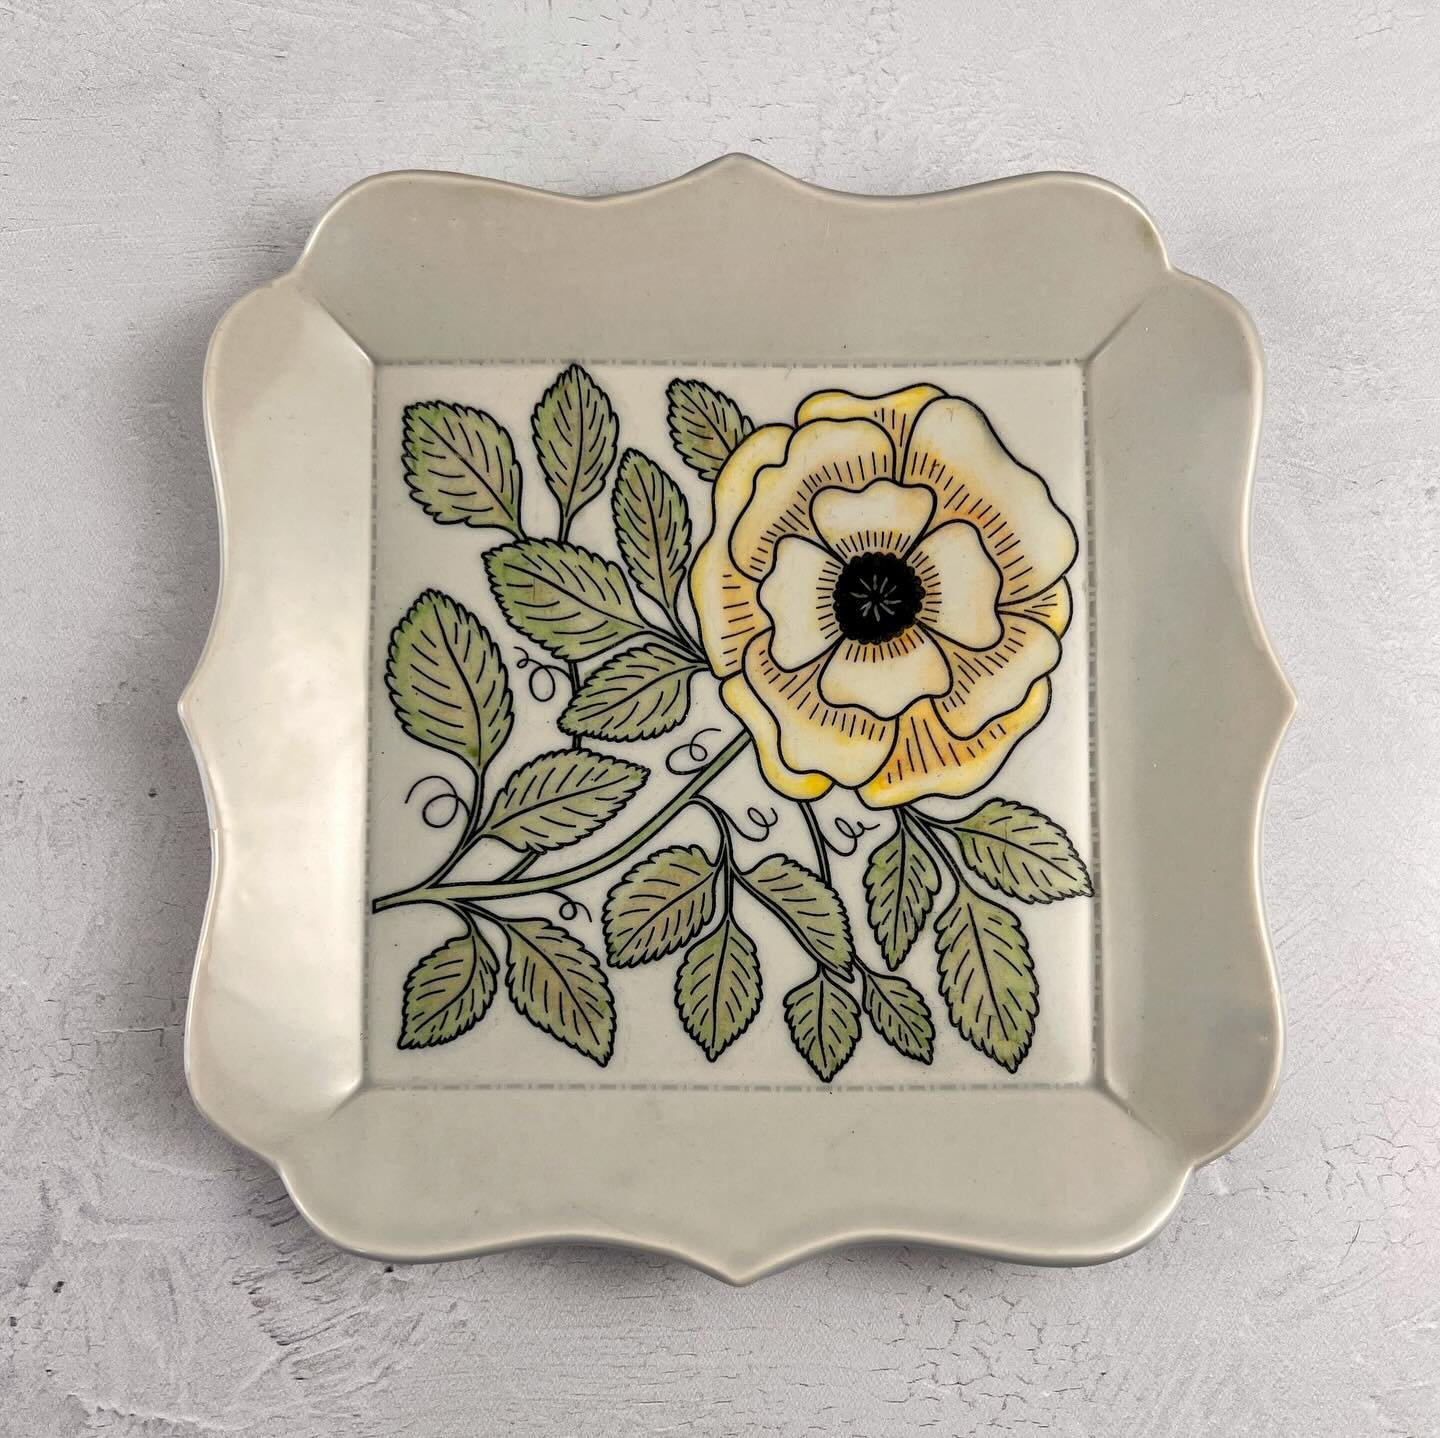 I&rsquo;m happy to say that this underglaze transfer design, Flower Sketches, has been restocked as of today. I&rsquo;ve been holding back posting this plate until they were available again on my website. I just love the way this one turned out. I ap